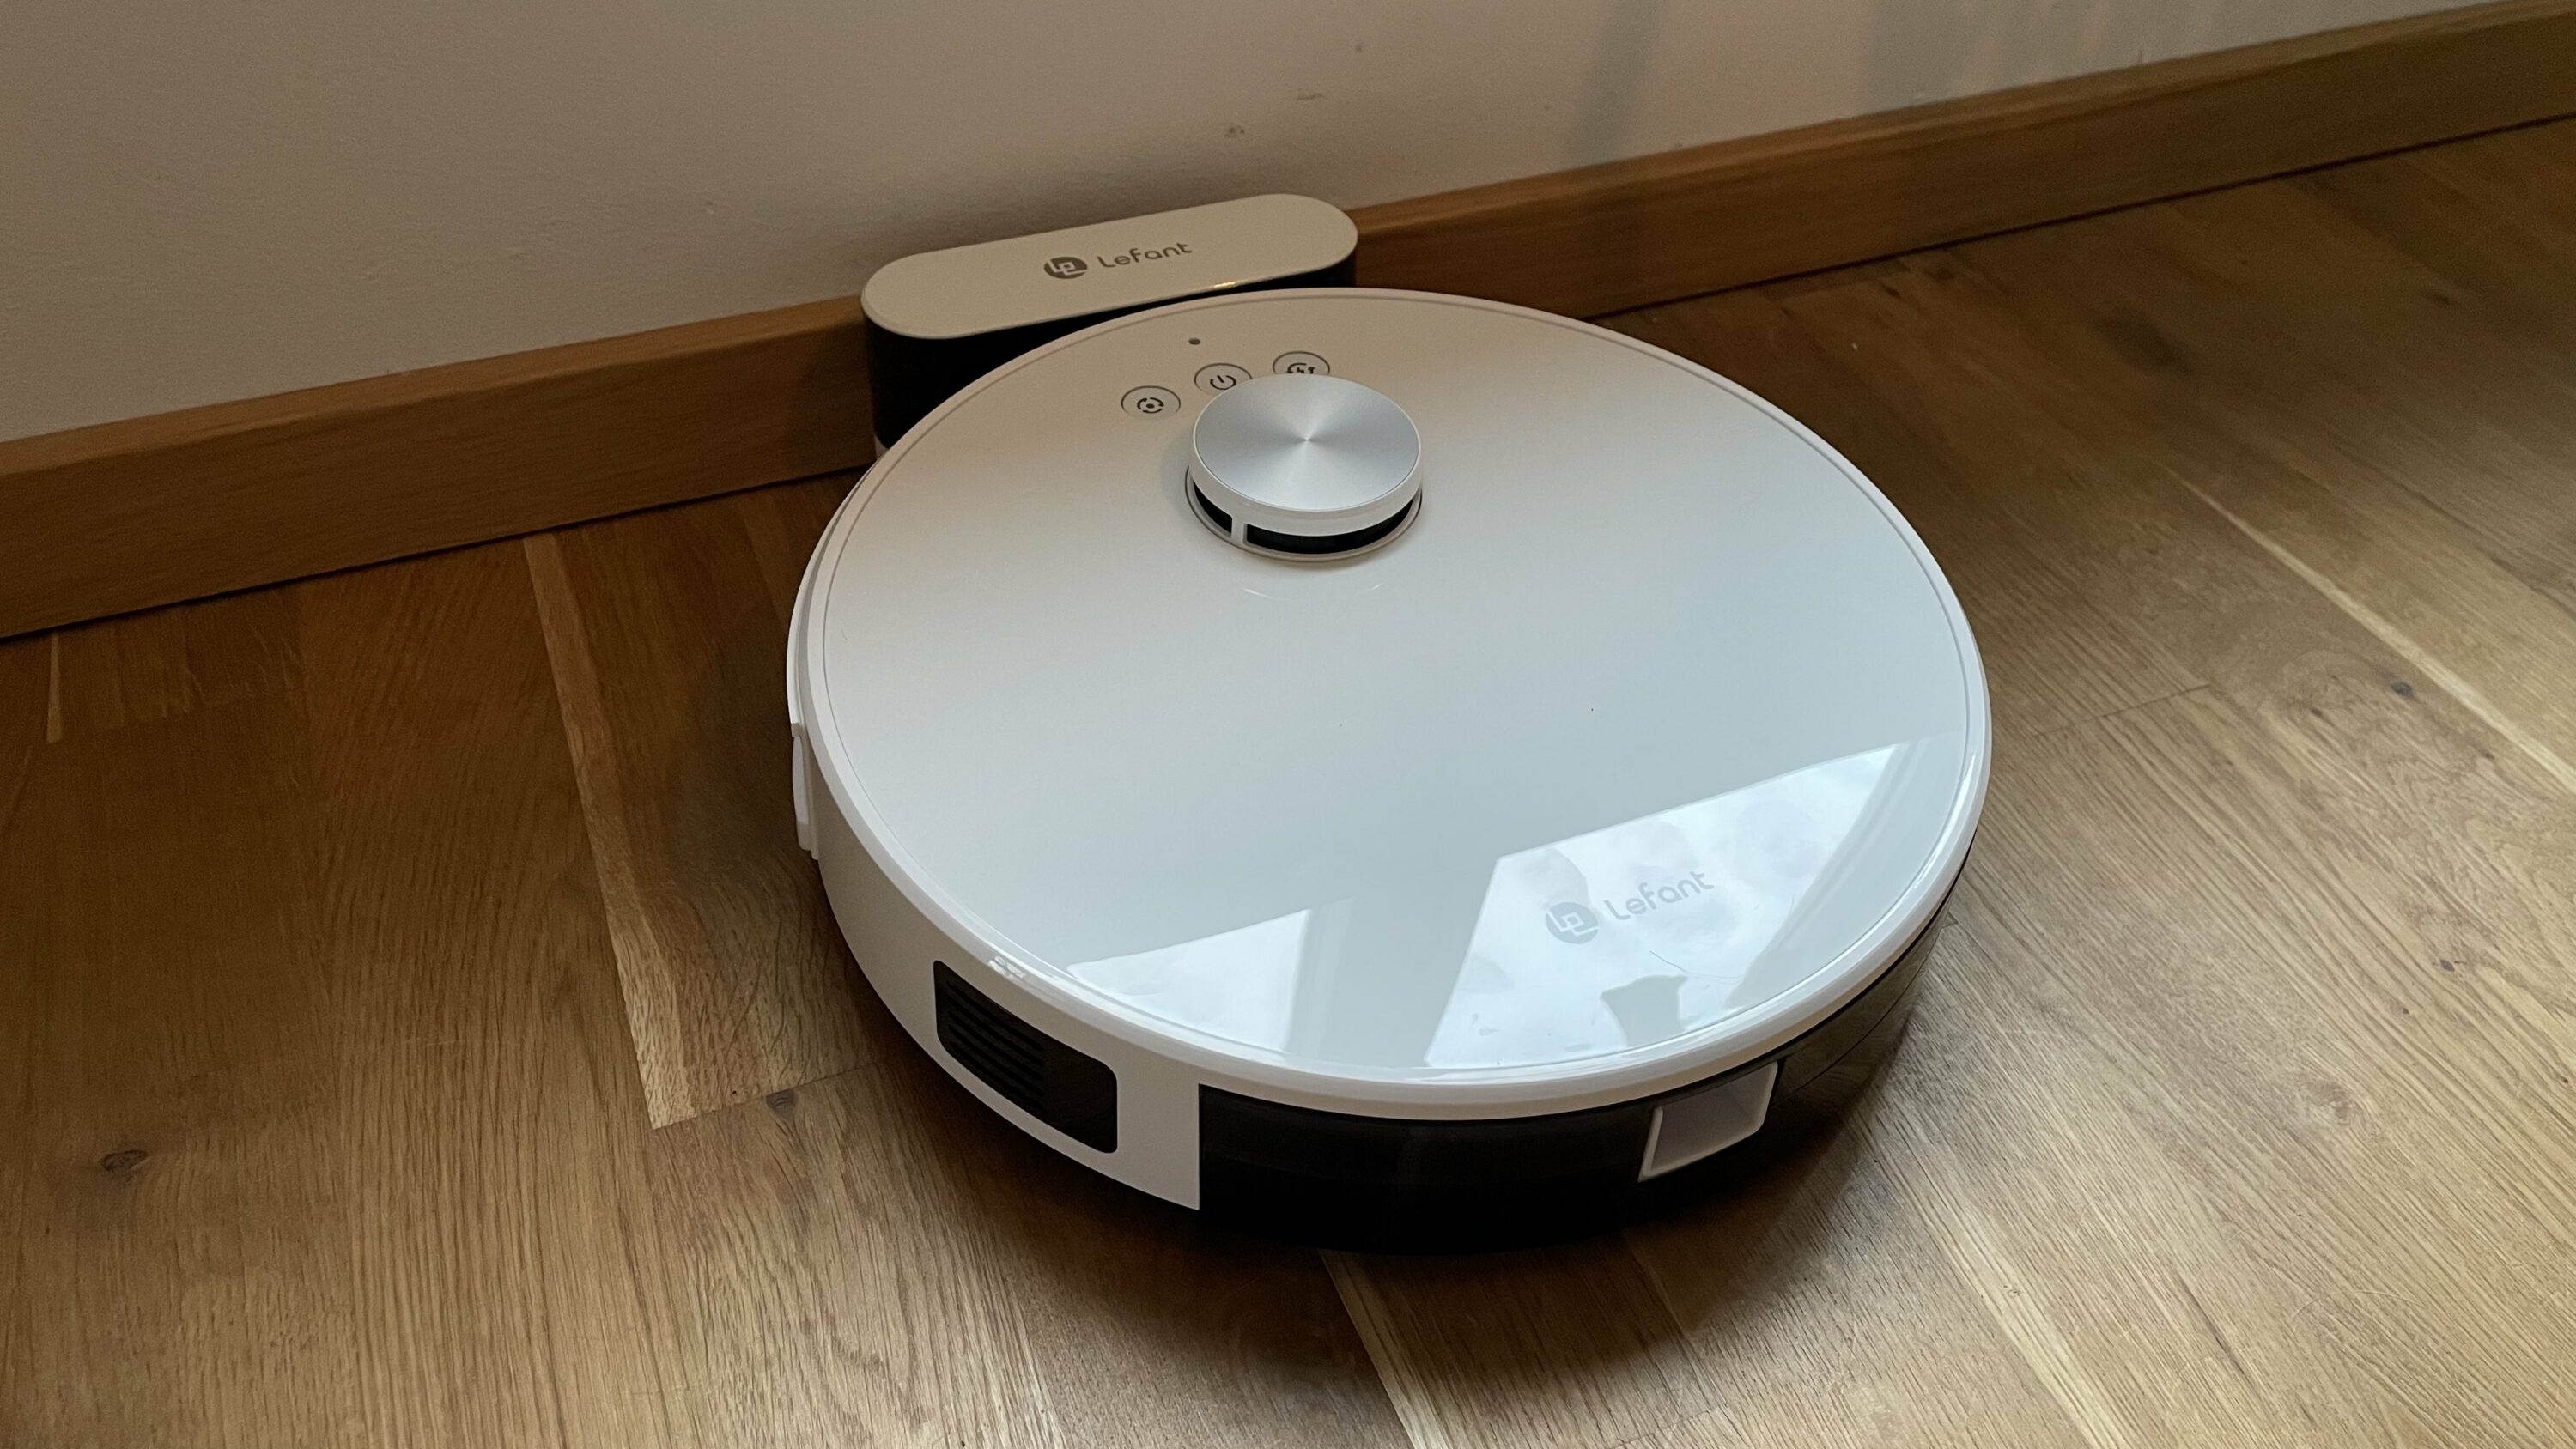 Lefant M1 Robot Vacuum and Mop review - The Gadgeteer